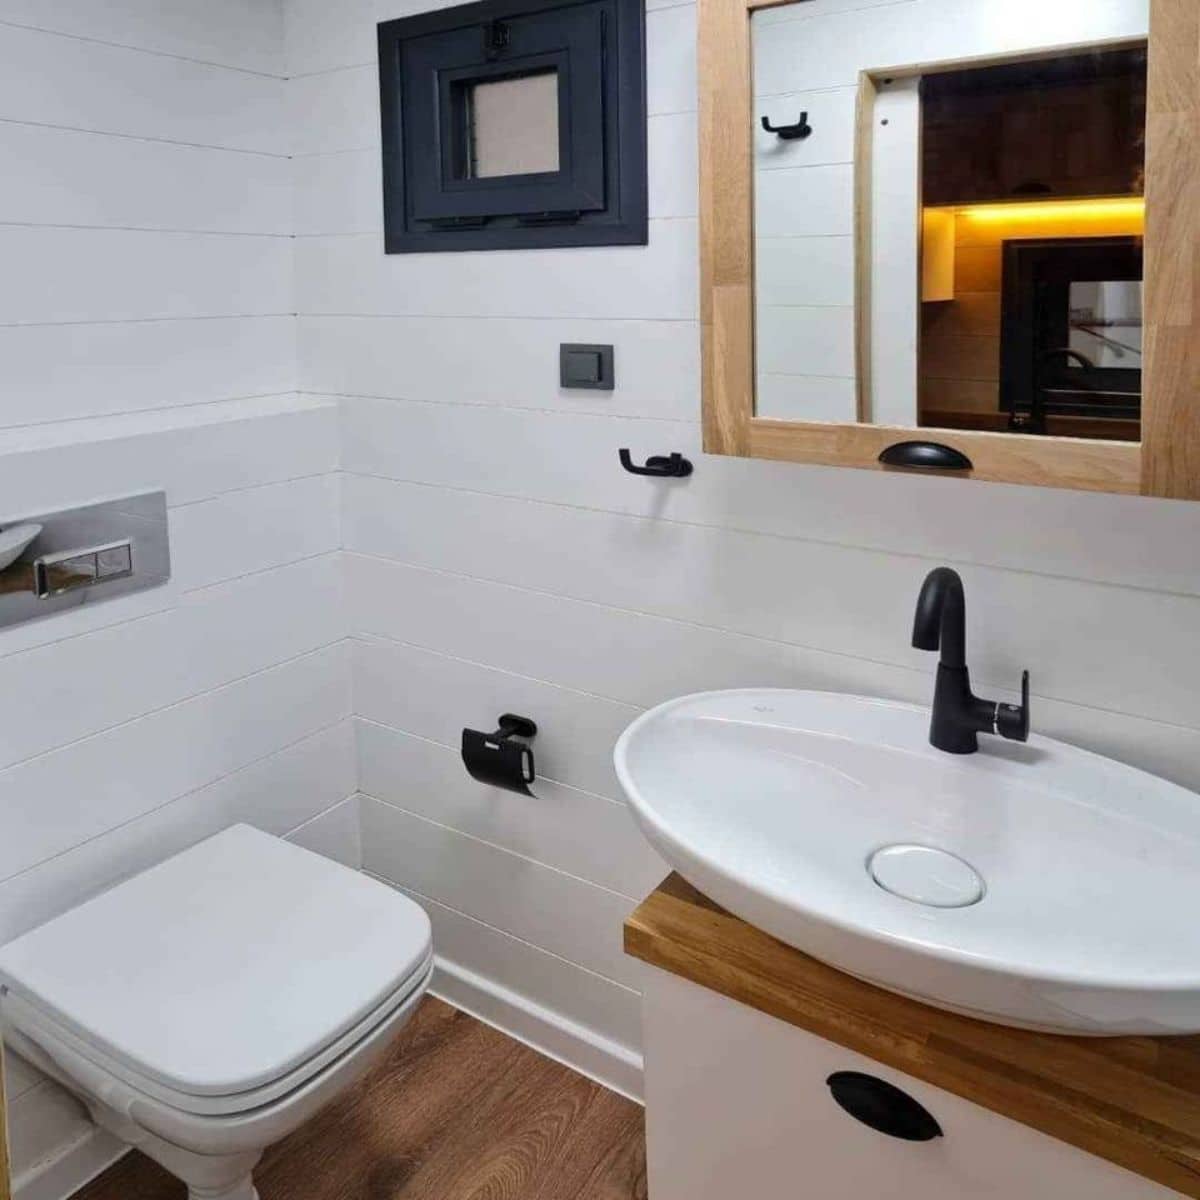 square toilet seat against white wall with white bowl sink under mirror with wood frame